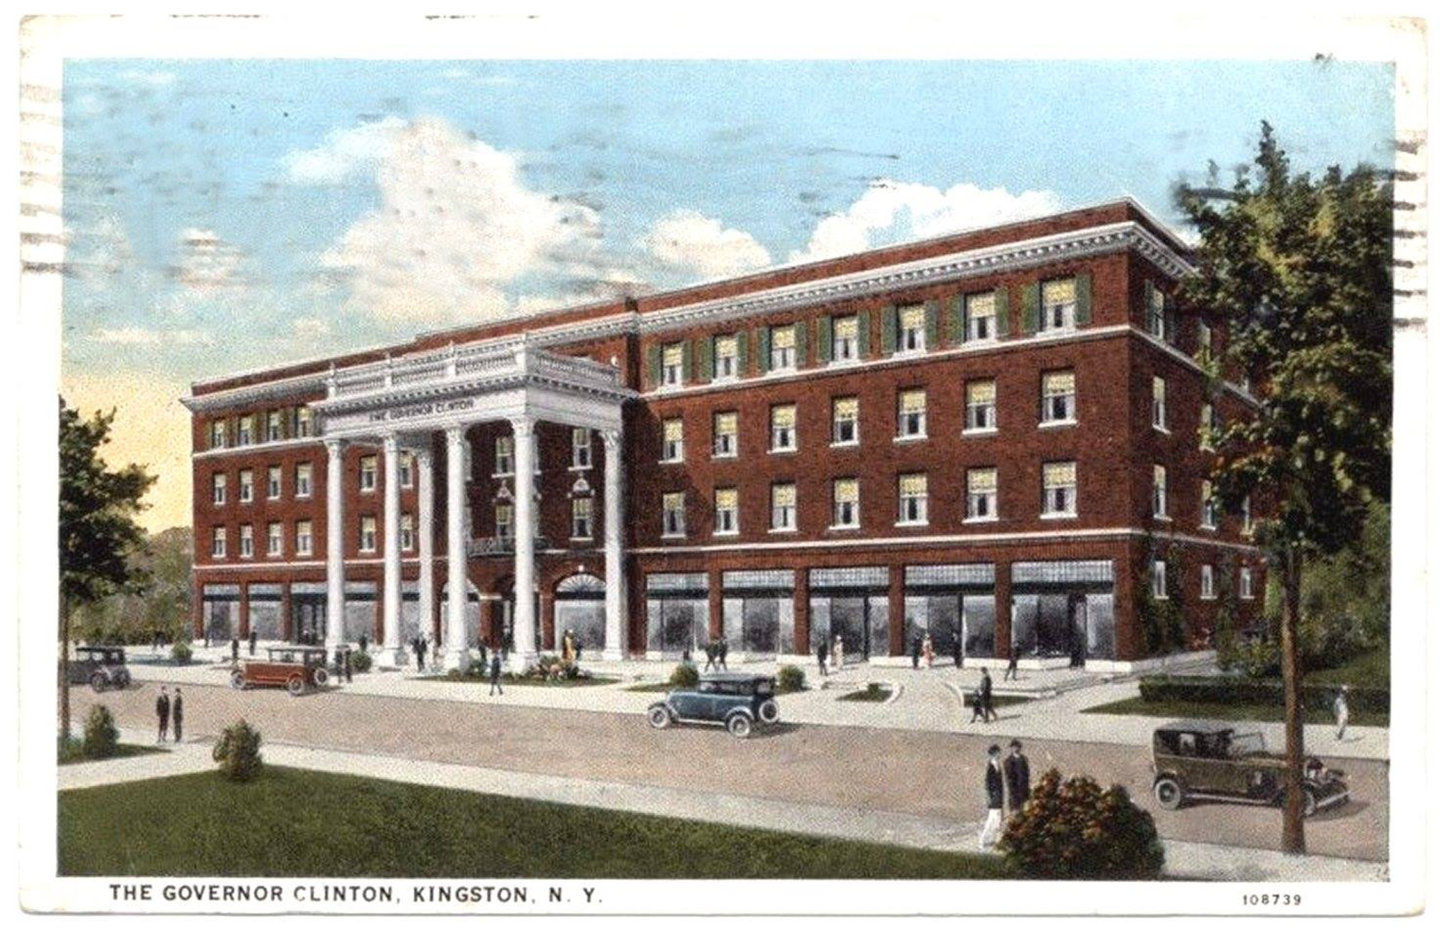 The former Governor Clinton Hotel is at 1 Albany Ave., Kingston